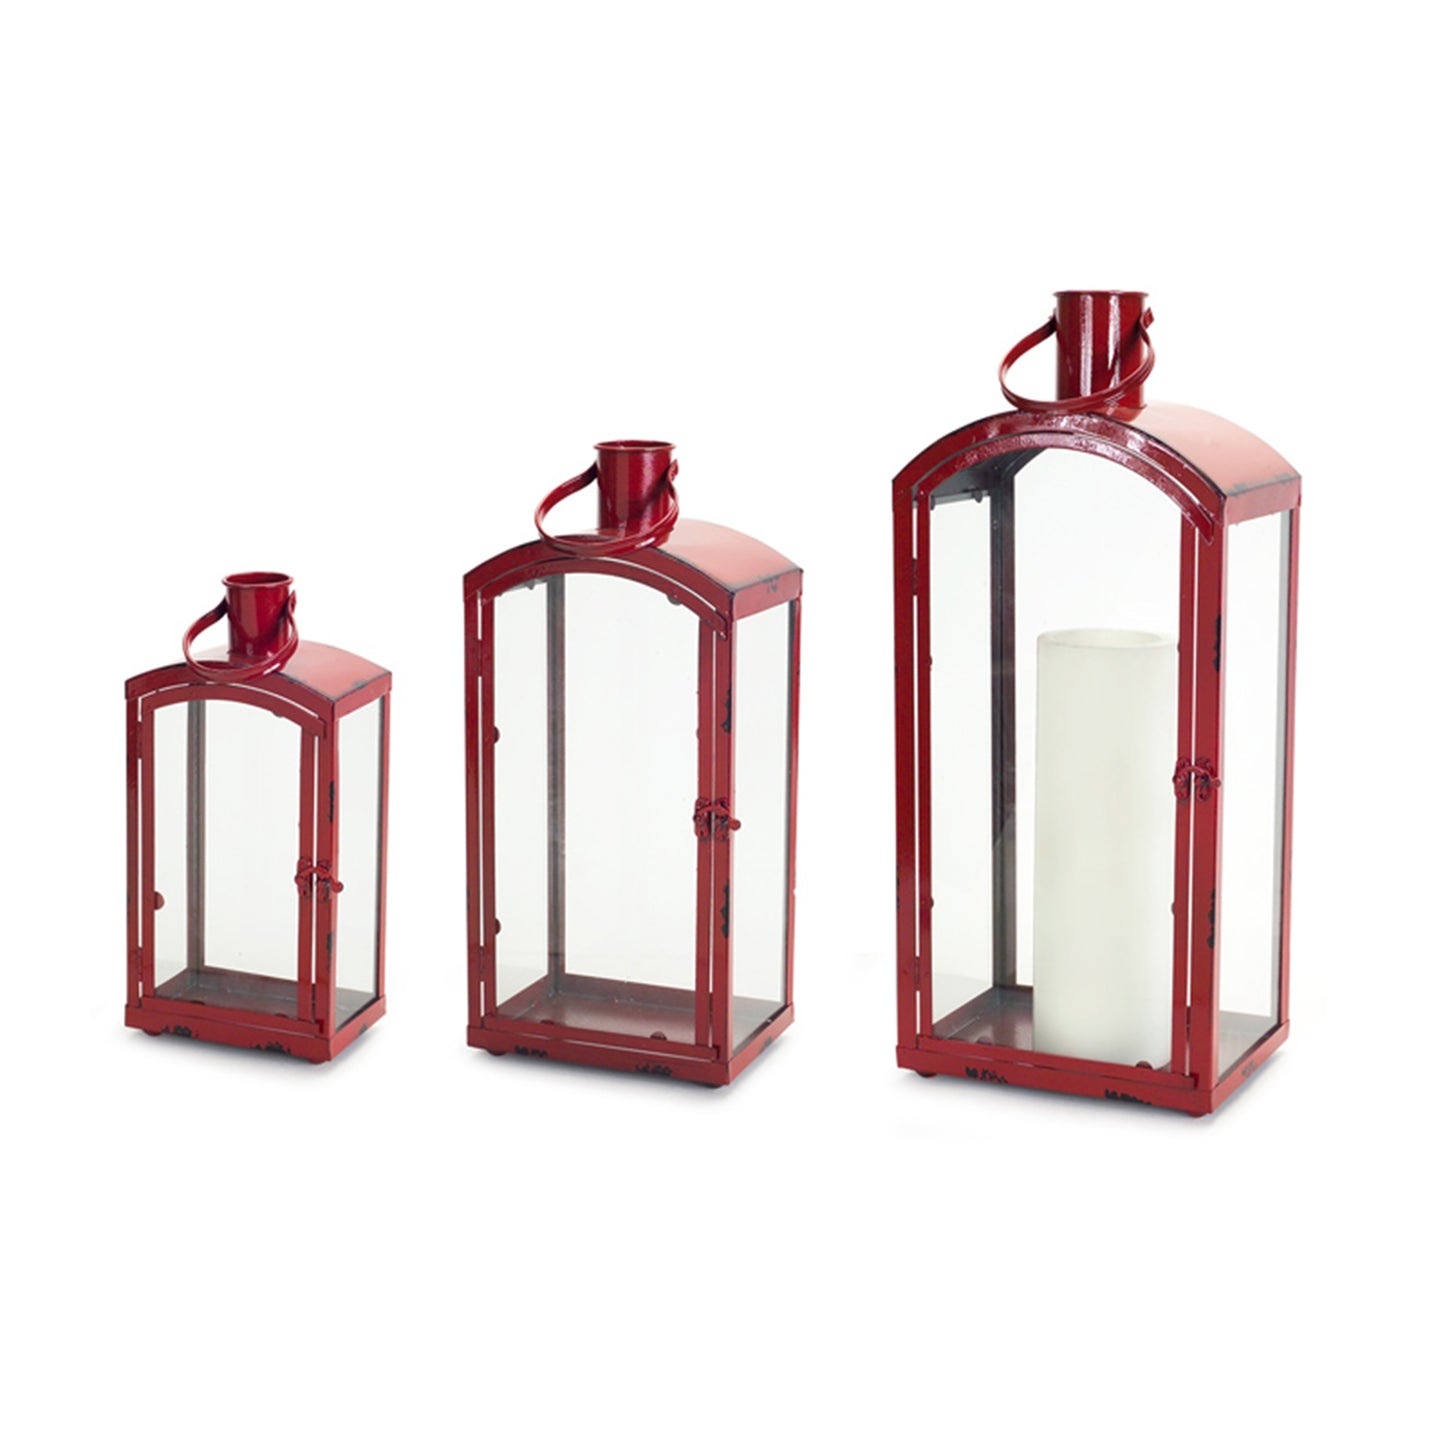 Rustic Red Curved Top Lantern (Set of 3)